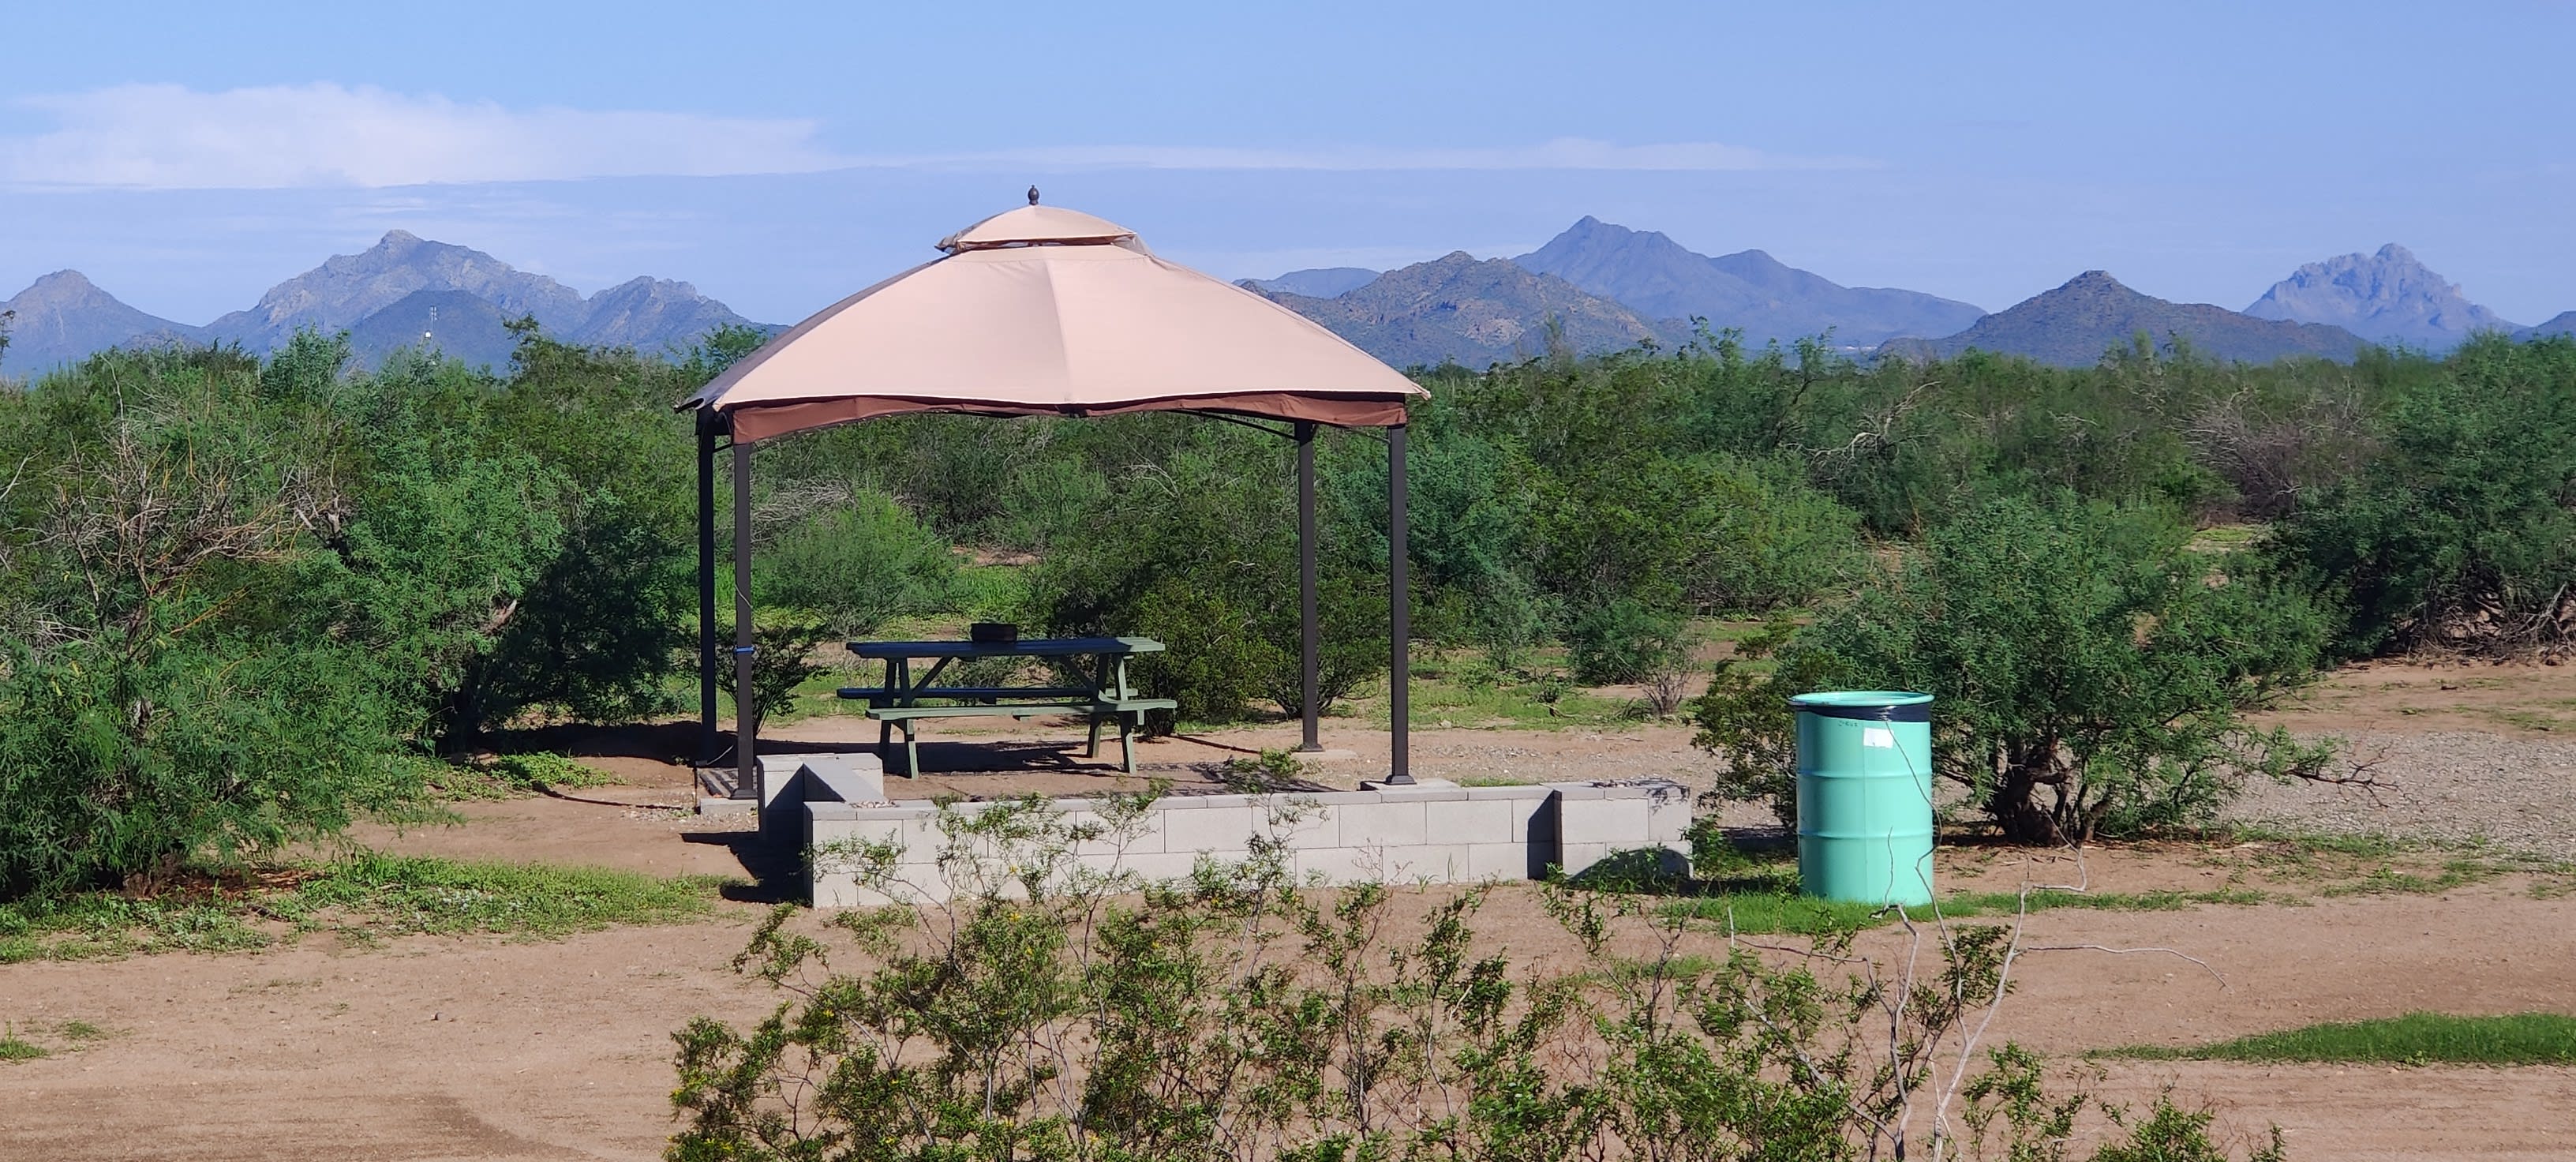 This campsite sits beautifully positioned between the Silverbell mountains on the West, Ironwood Forest National Monument on the SouthWest, and Saguaro National Park on the East.  All are a very short distance (1/4 mile - 5 miles) to the property.